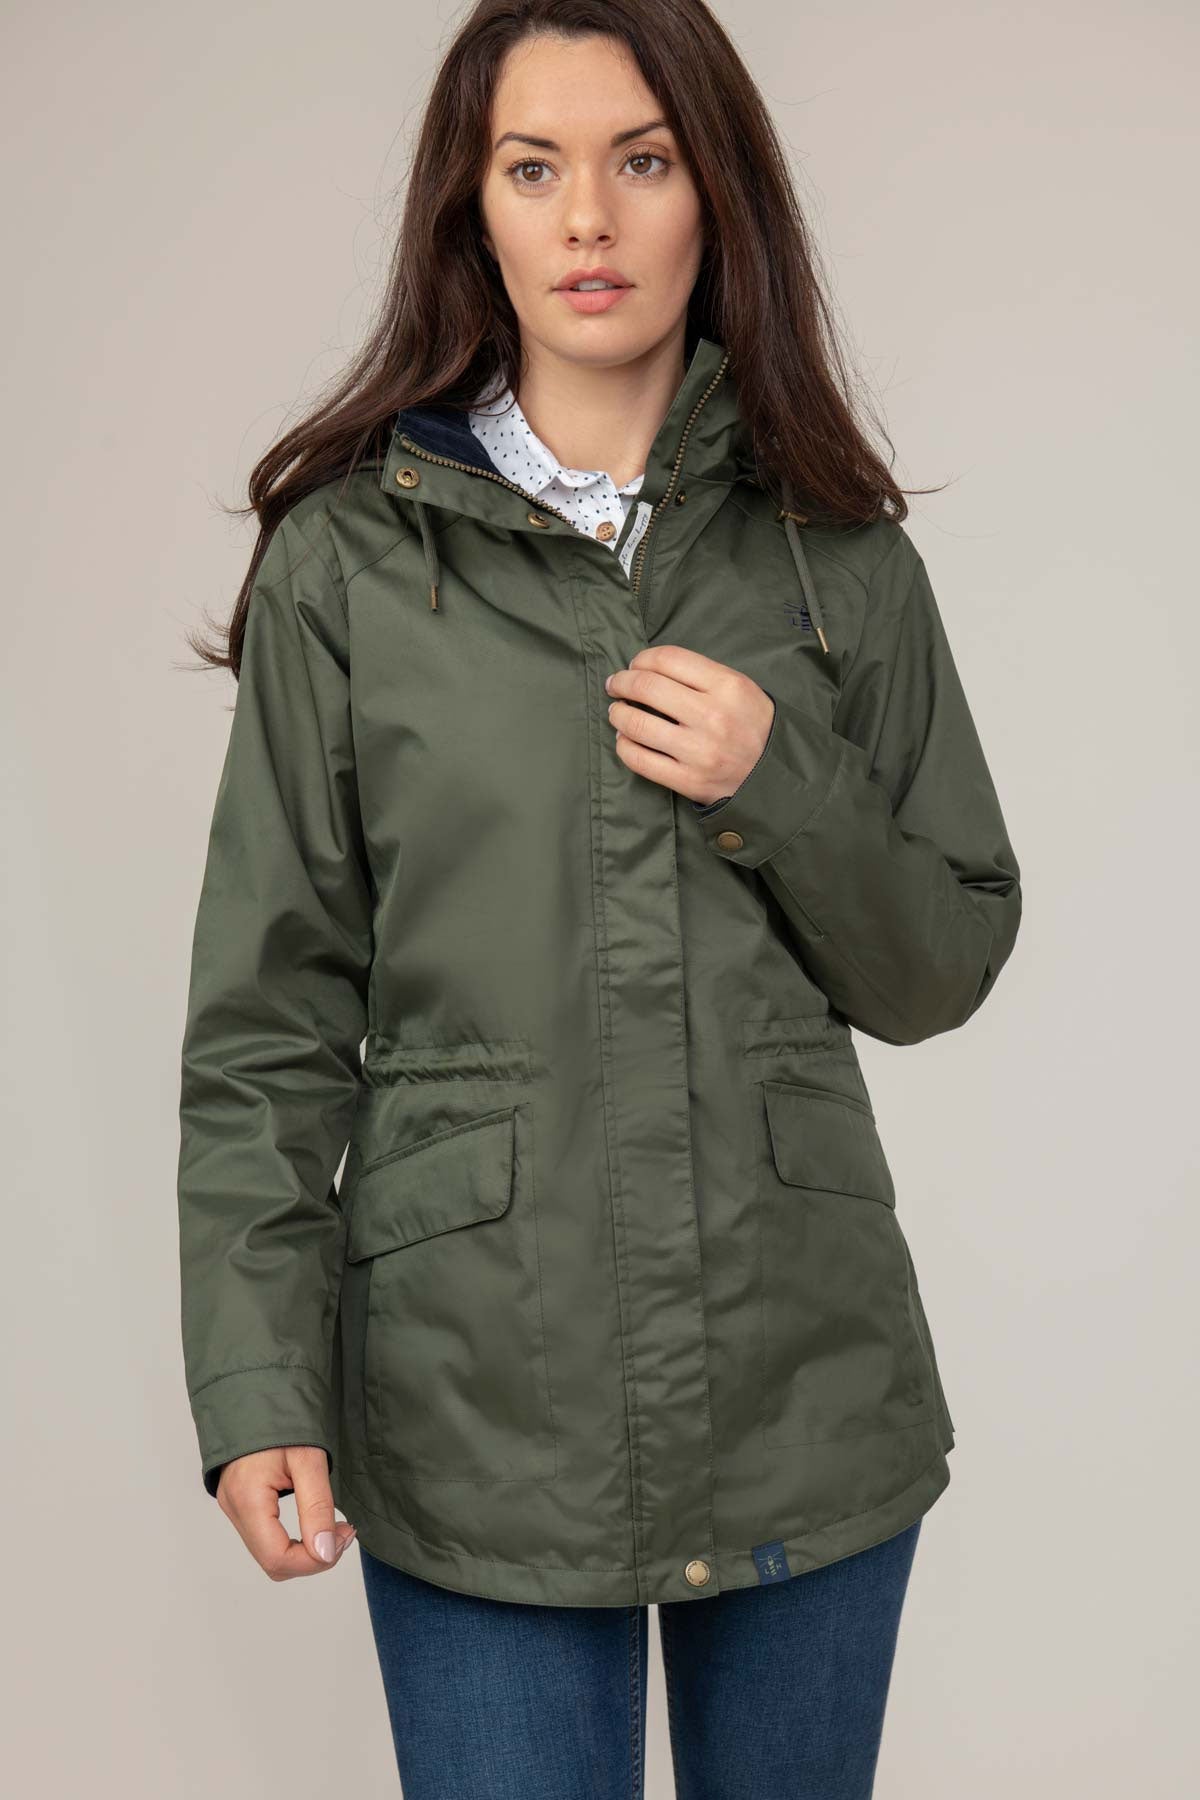 Forest Lighthouse Kendal Waterproof Coat 